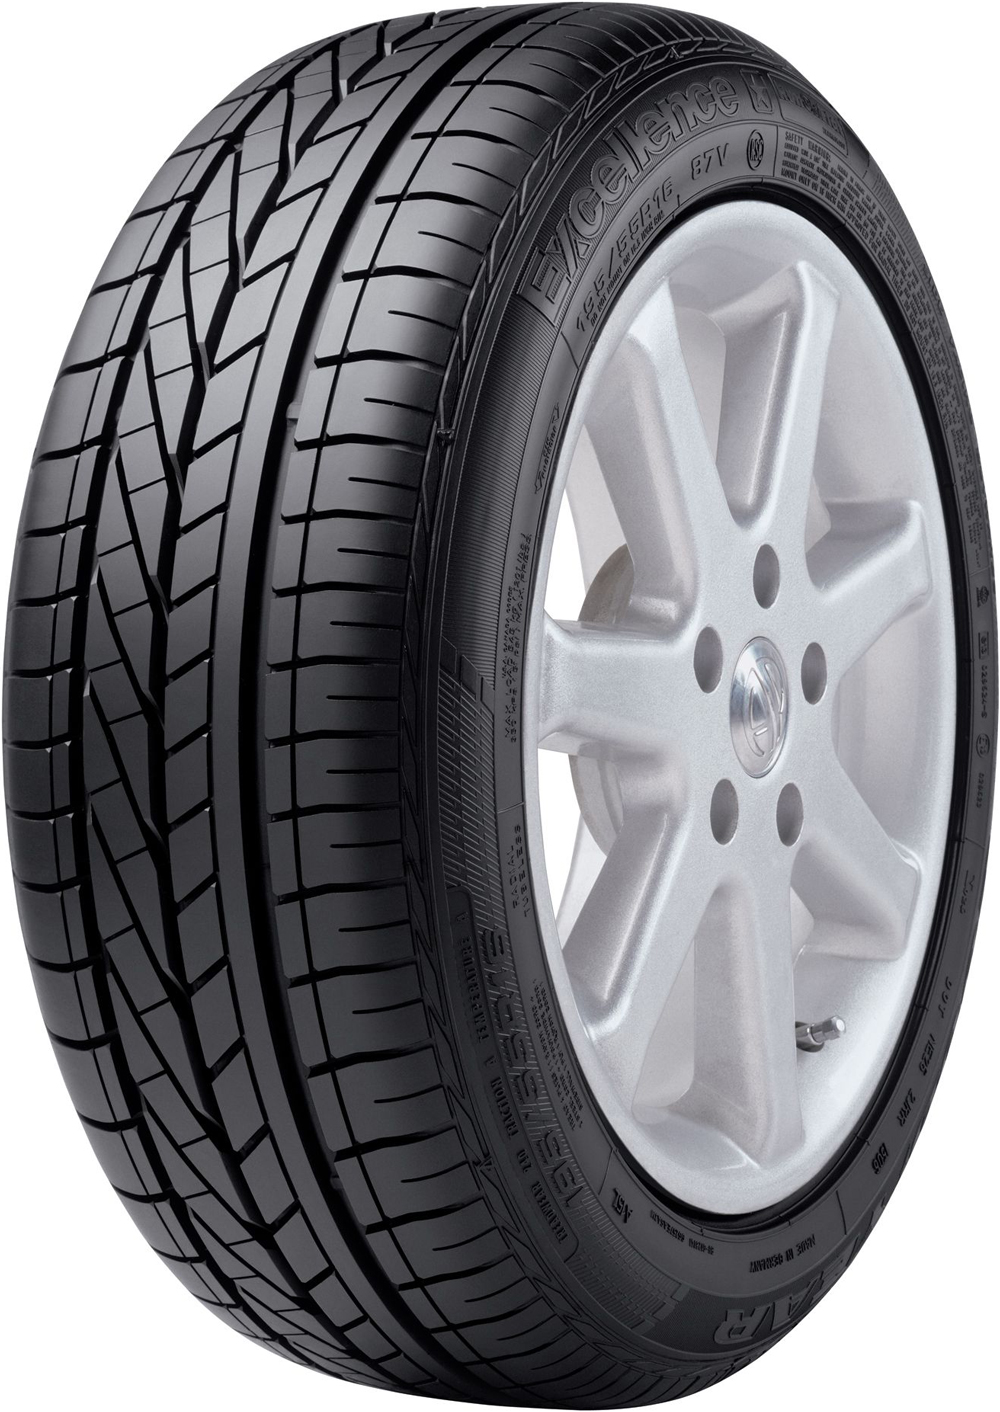 Гуми за джип GOODYEAR EXCELLENAO AUDI 235/55 R17 99V